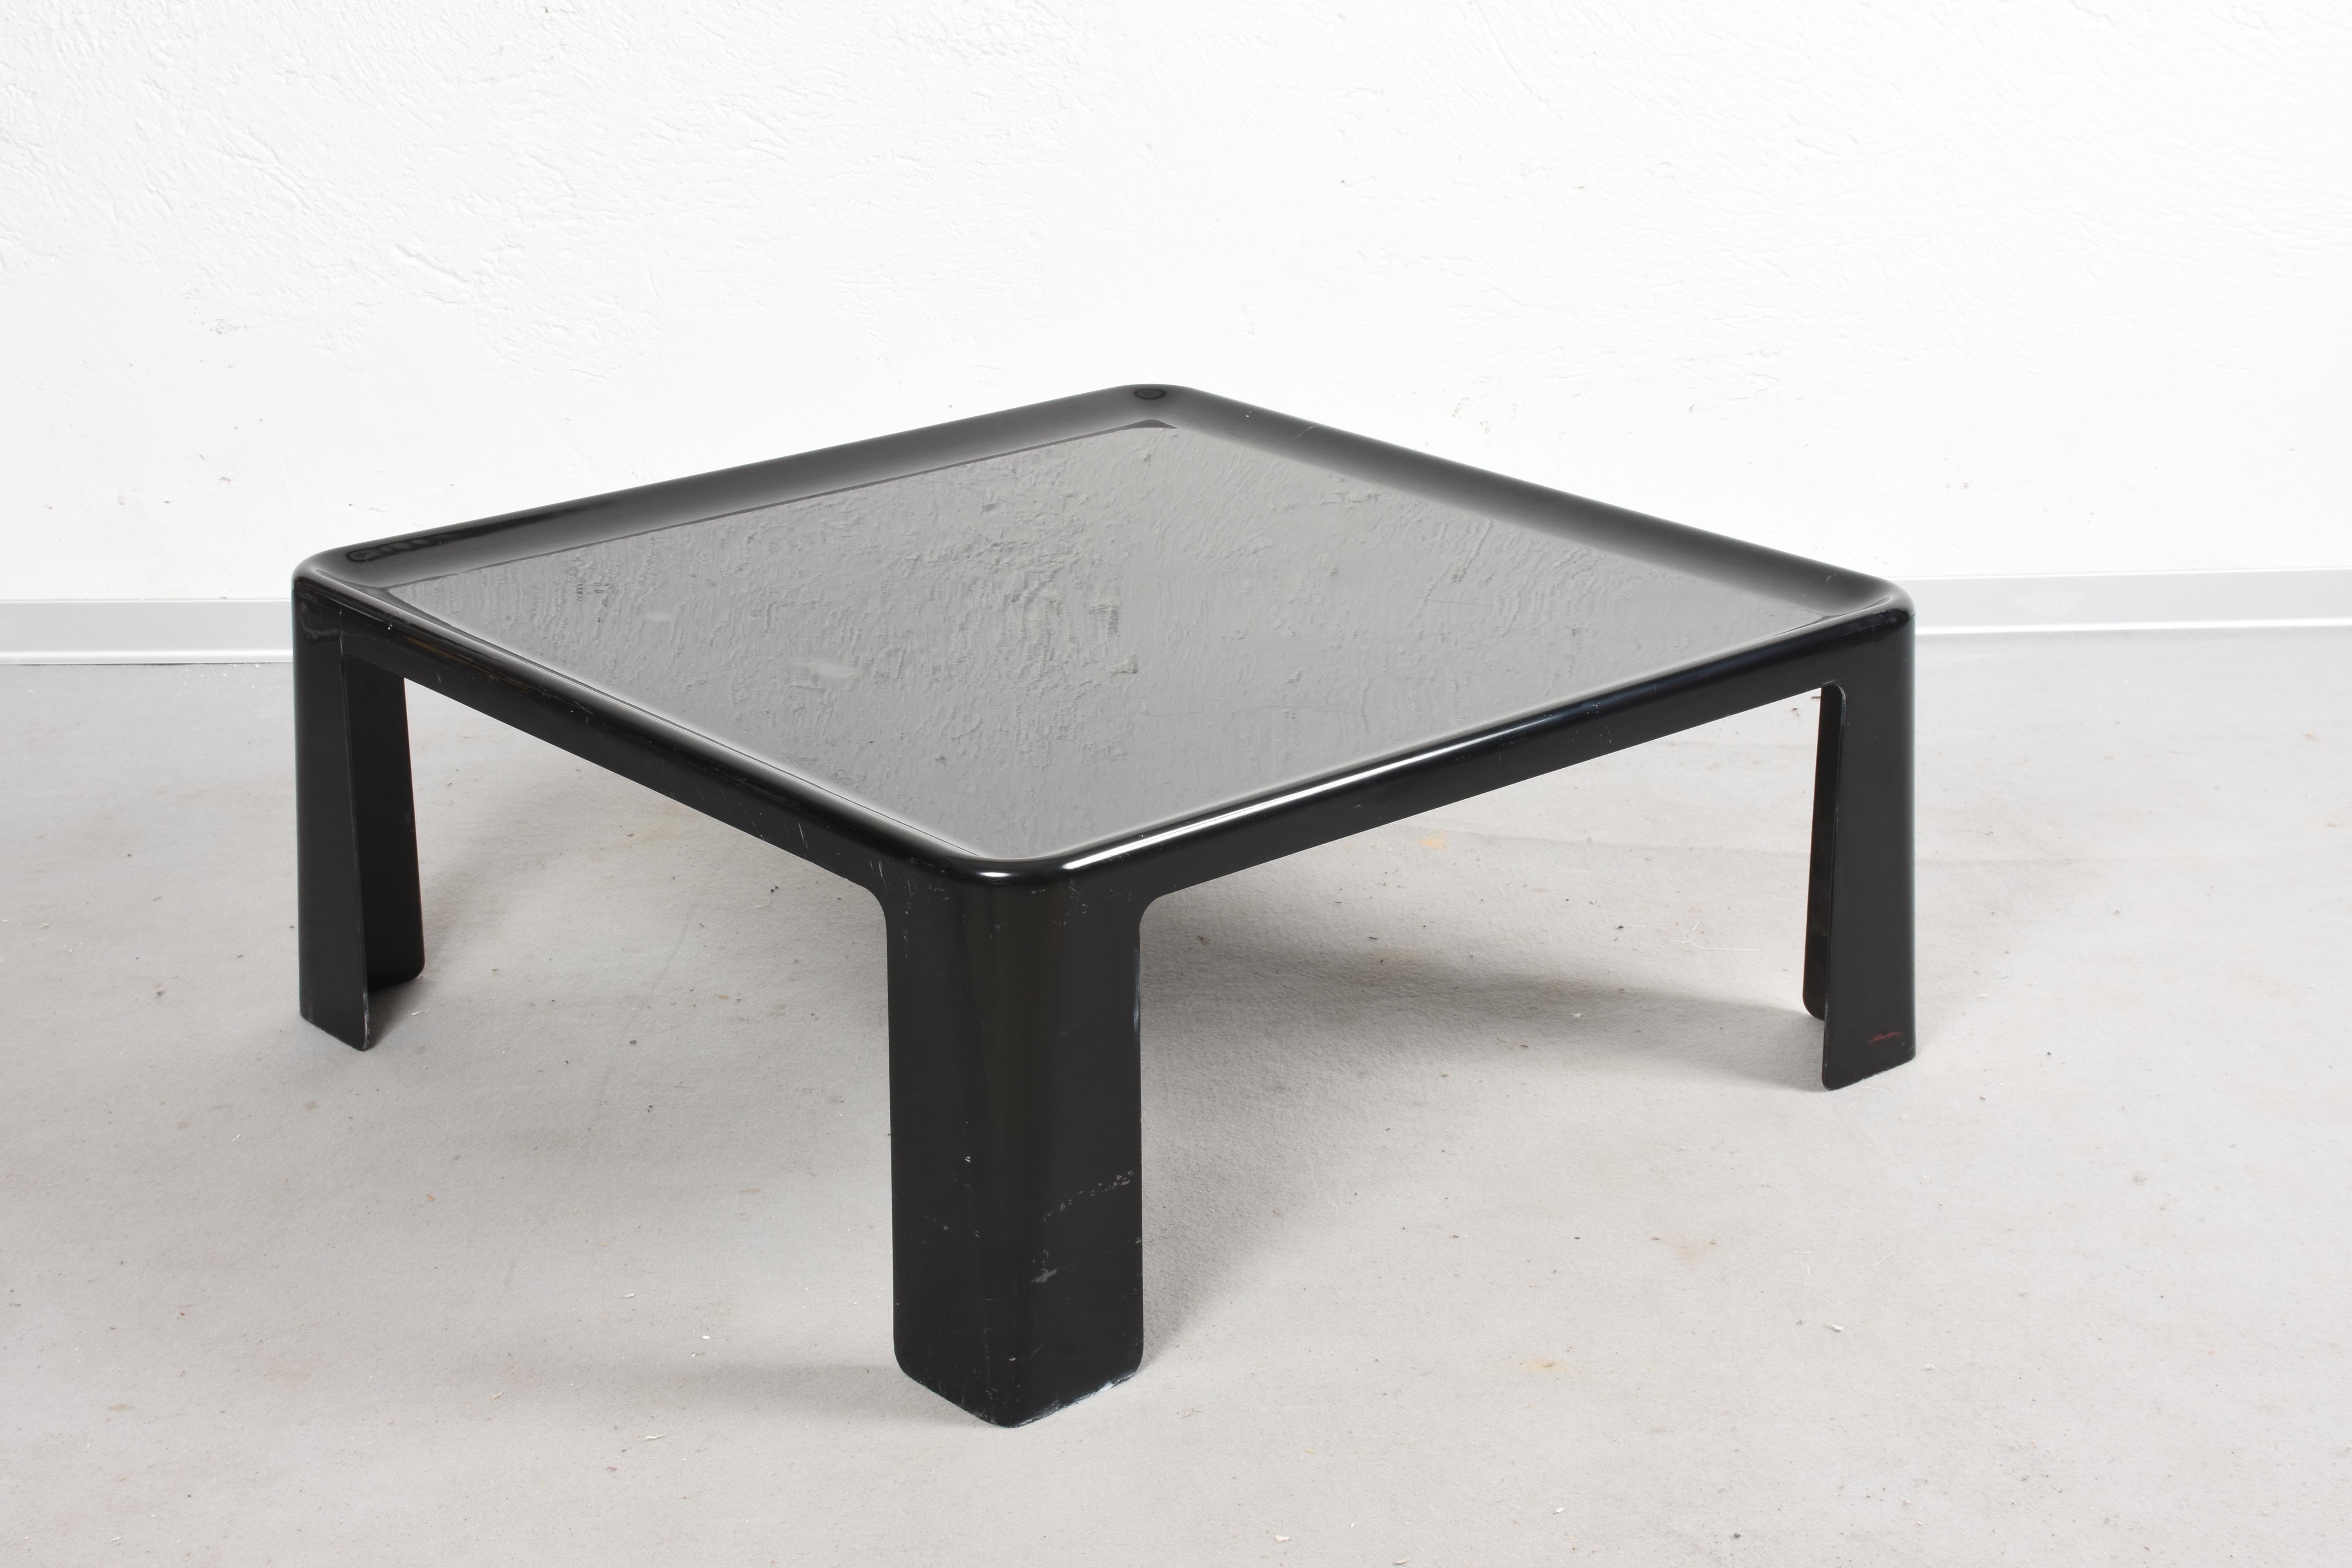 This side table or coffee table is made of fiberglass (Fiberlite) in Black. It is square with an indented tabletop. It was designed by Mario Bellini for C&B Italia in the 1960s.
This table is the large size, 84 x 84 x 36 cm.
We have other sizes